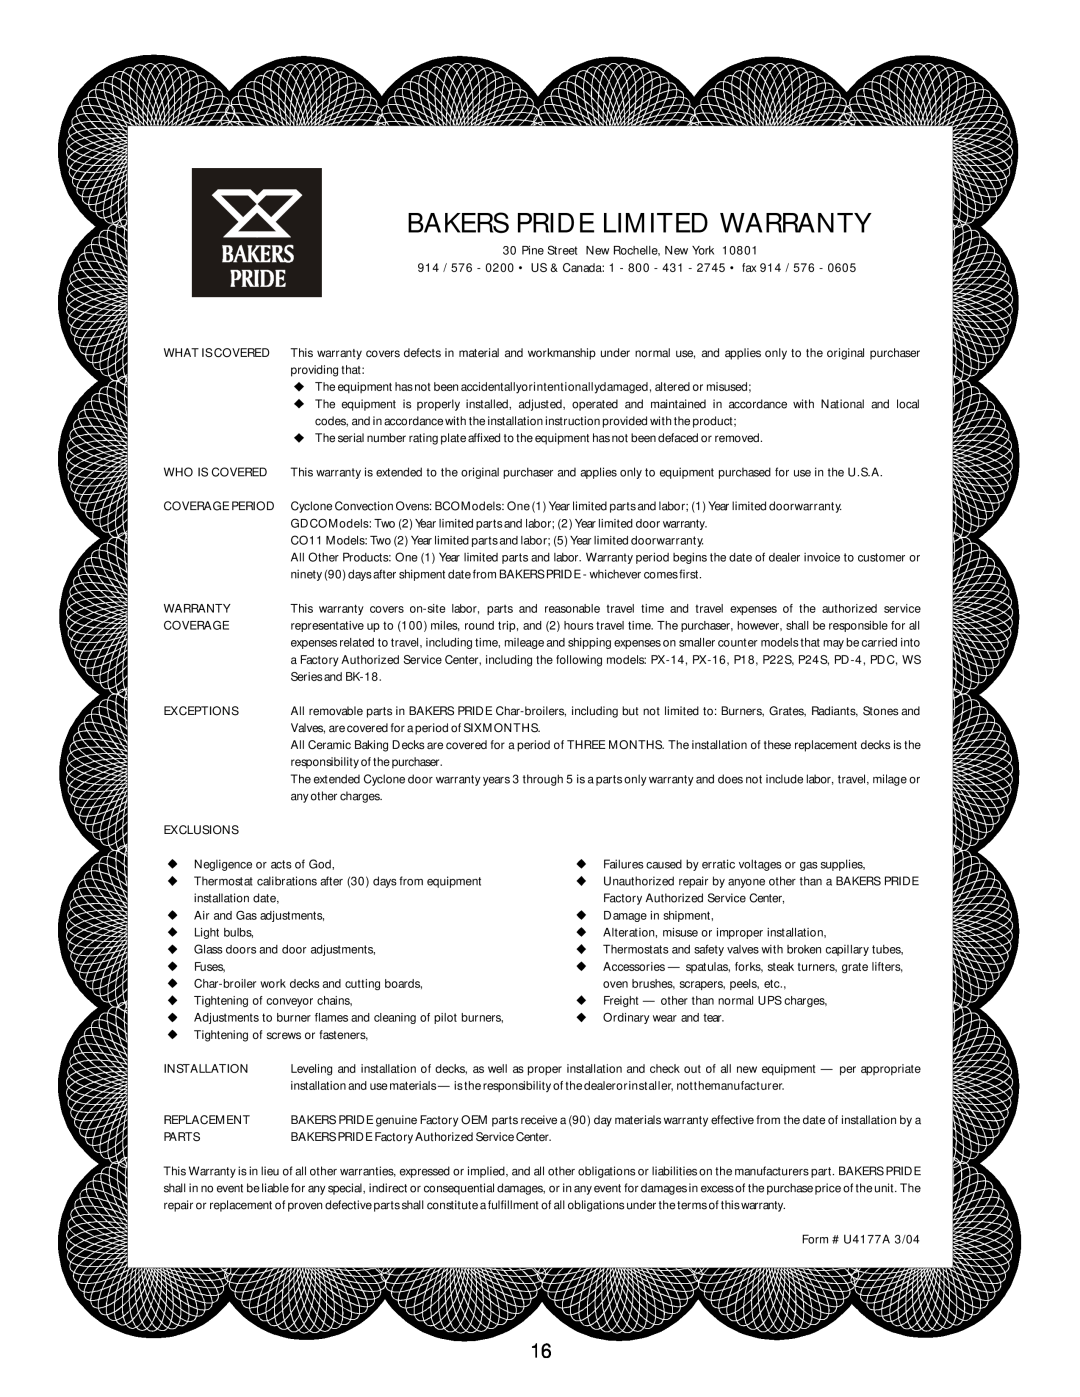 Bakers Pride Oven EP-2-2828 manual Bakers Pride Limited Warranty 